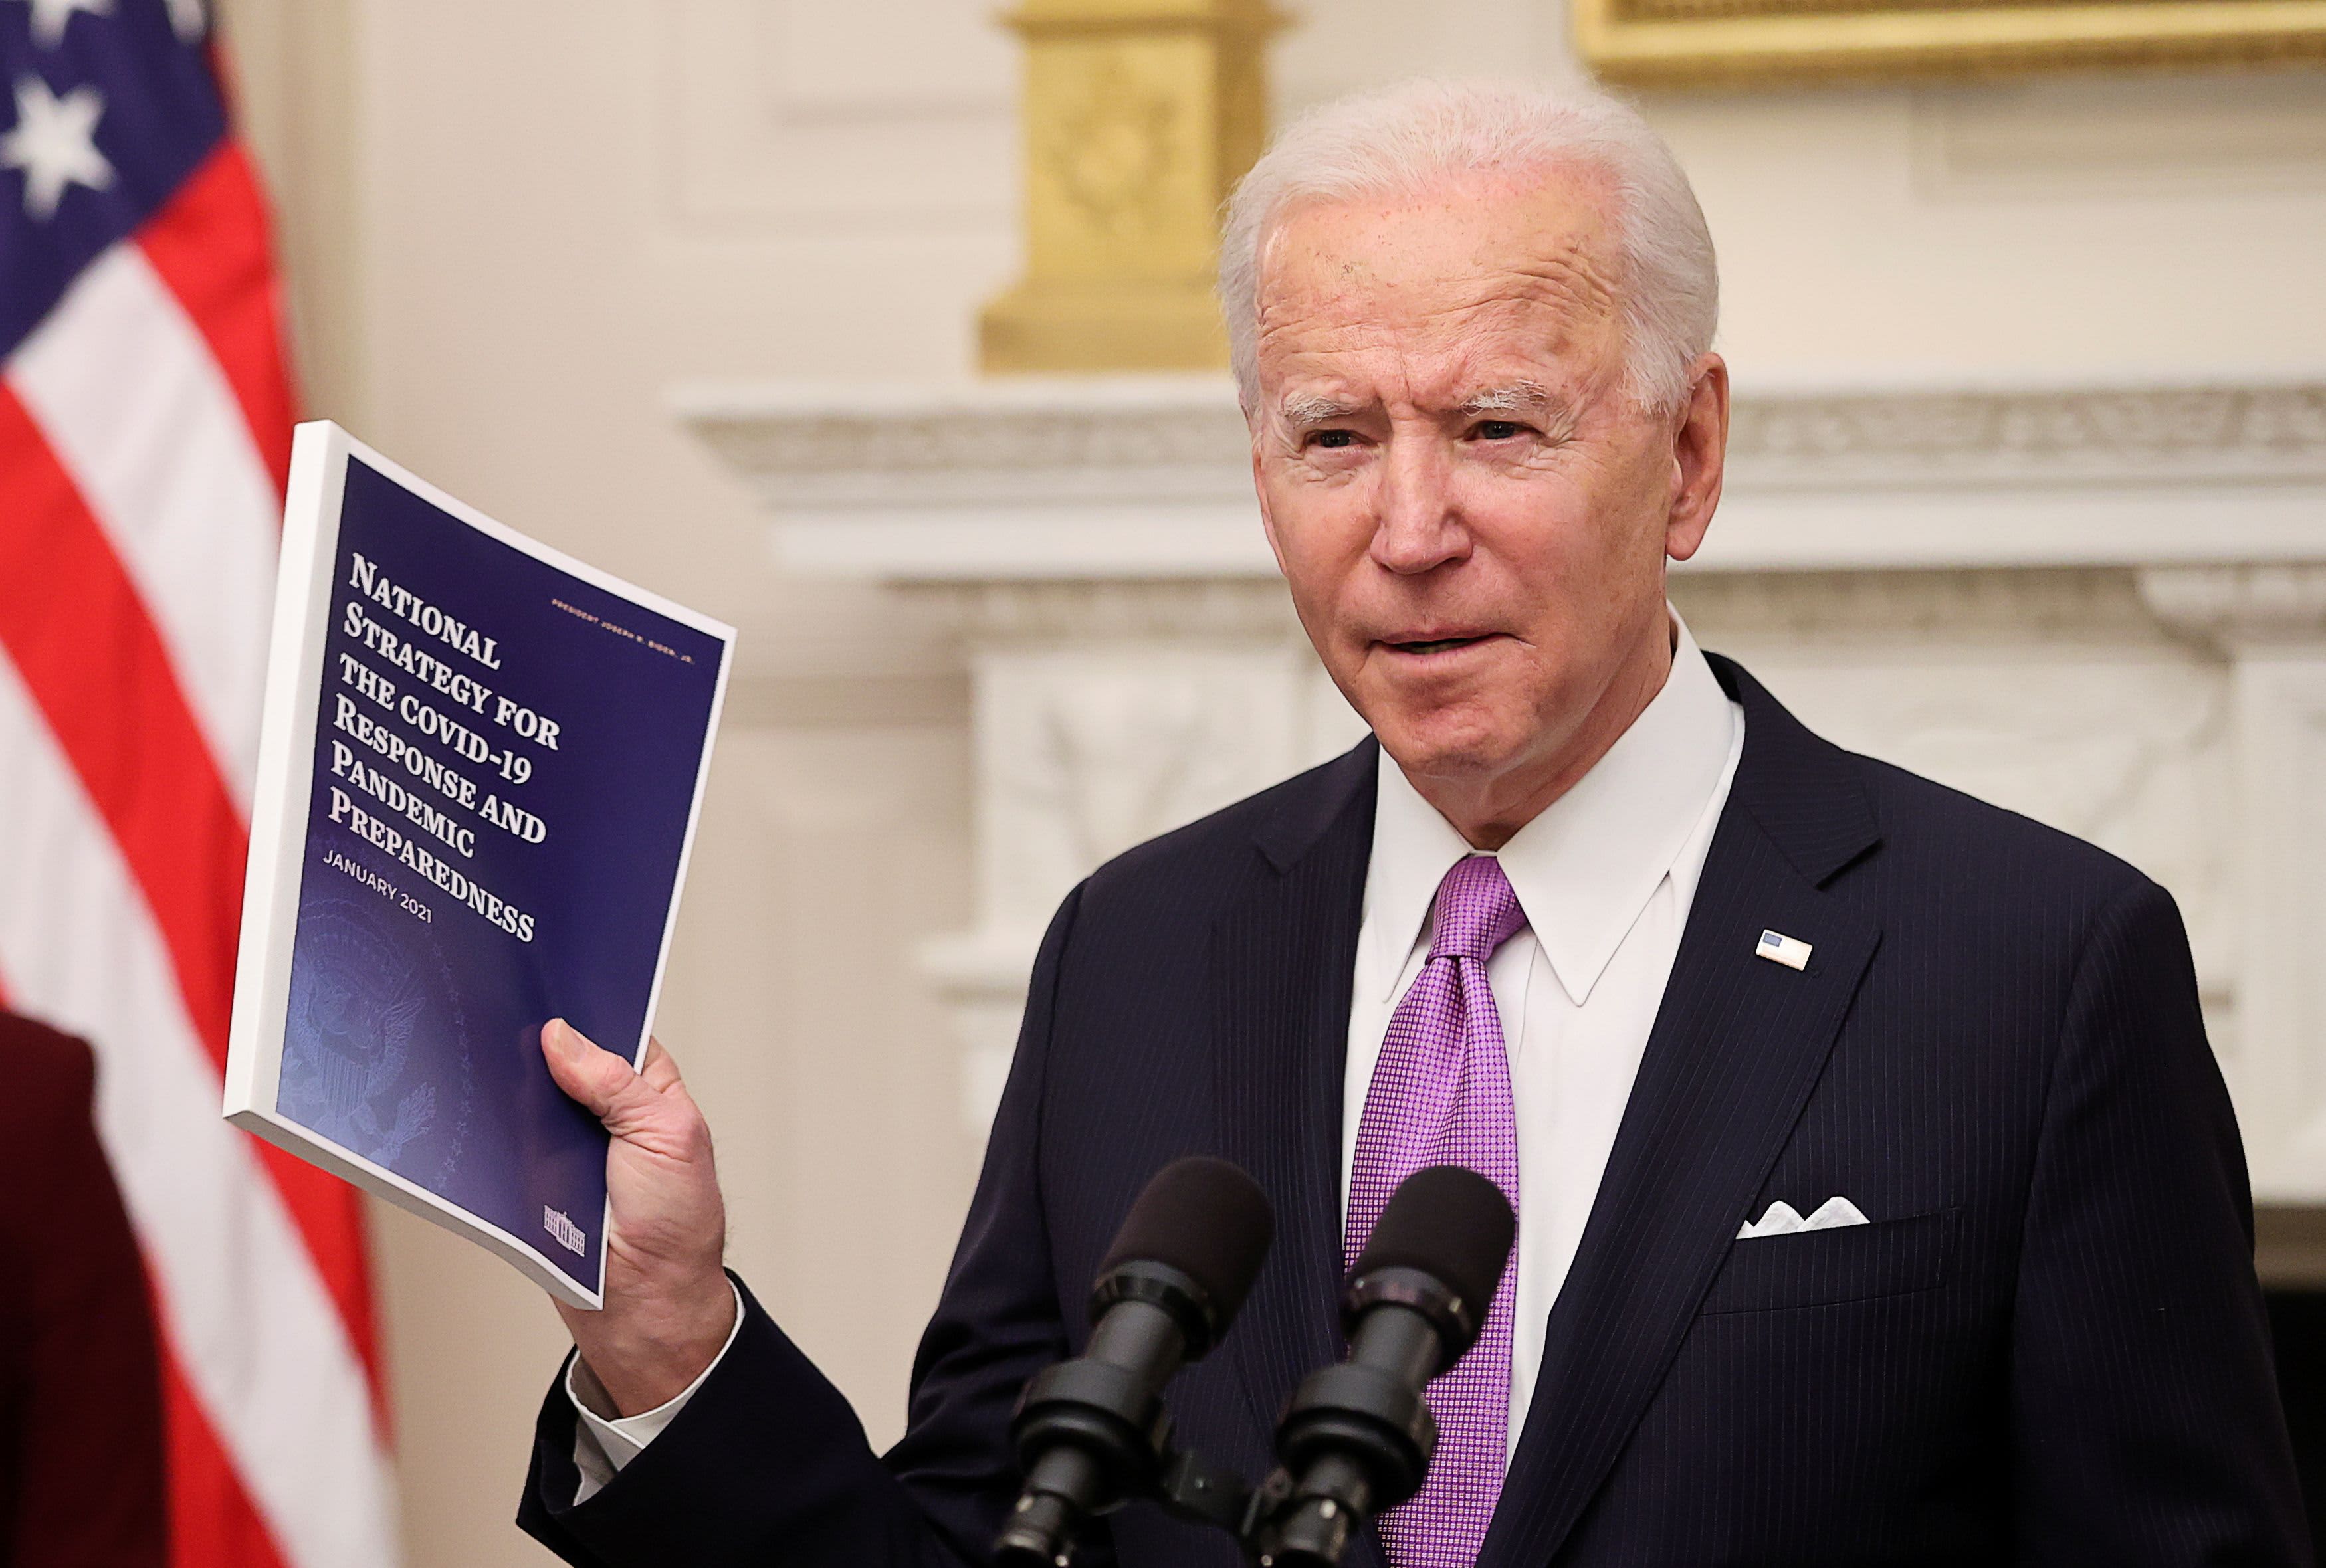 Biden has promised to reform Social Security — some changes could come as soon as this year